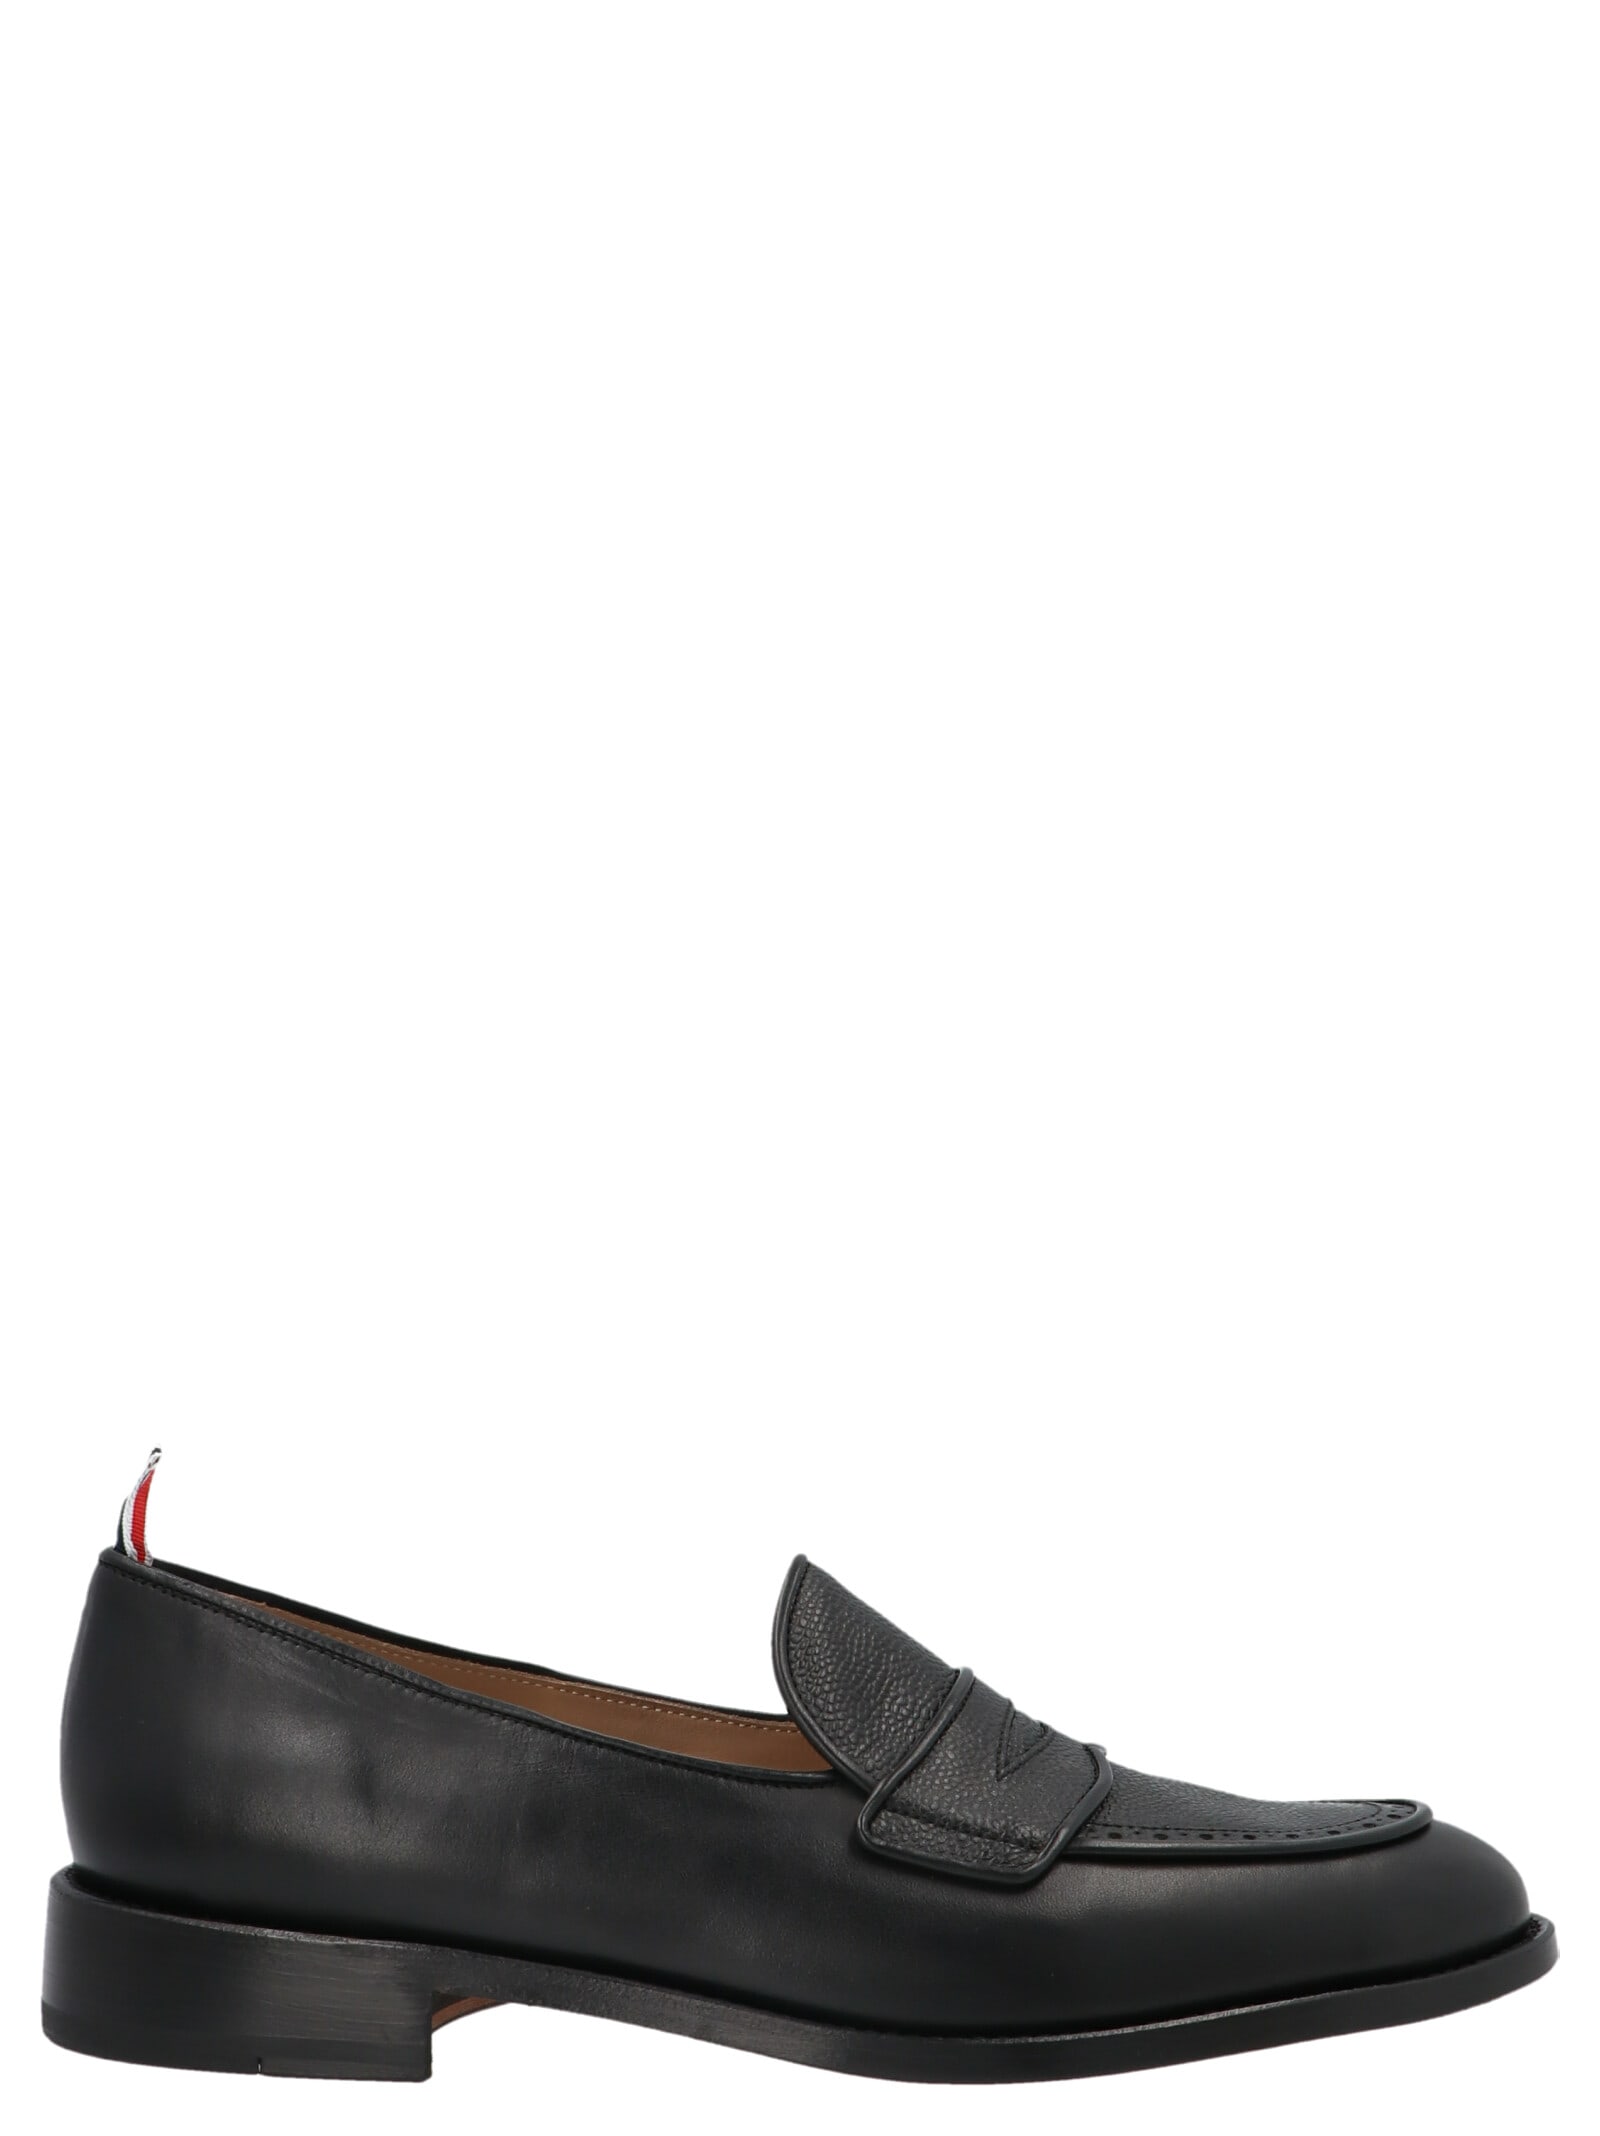 Thom Browne soft Penny Loafers